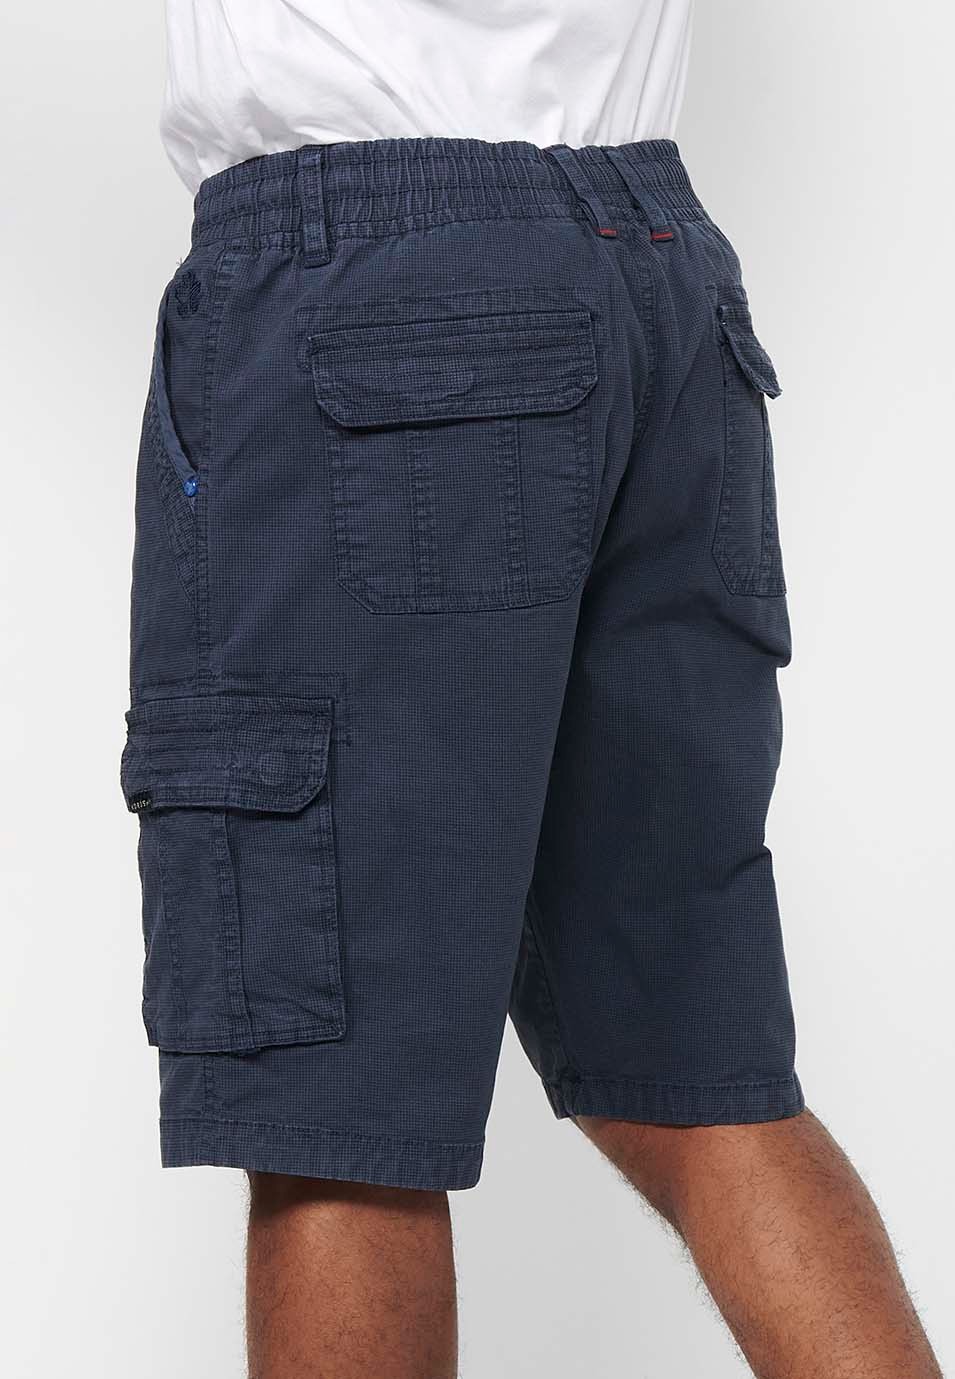 Cargo shorts with front closure with zipper and button and four pockets, two rear pockets with flap with two cargo pockets with flap and adjustable waist with drawstring in Navy Color for Men 5